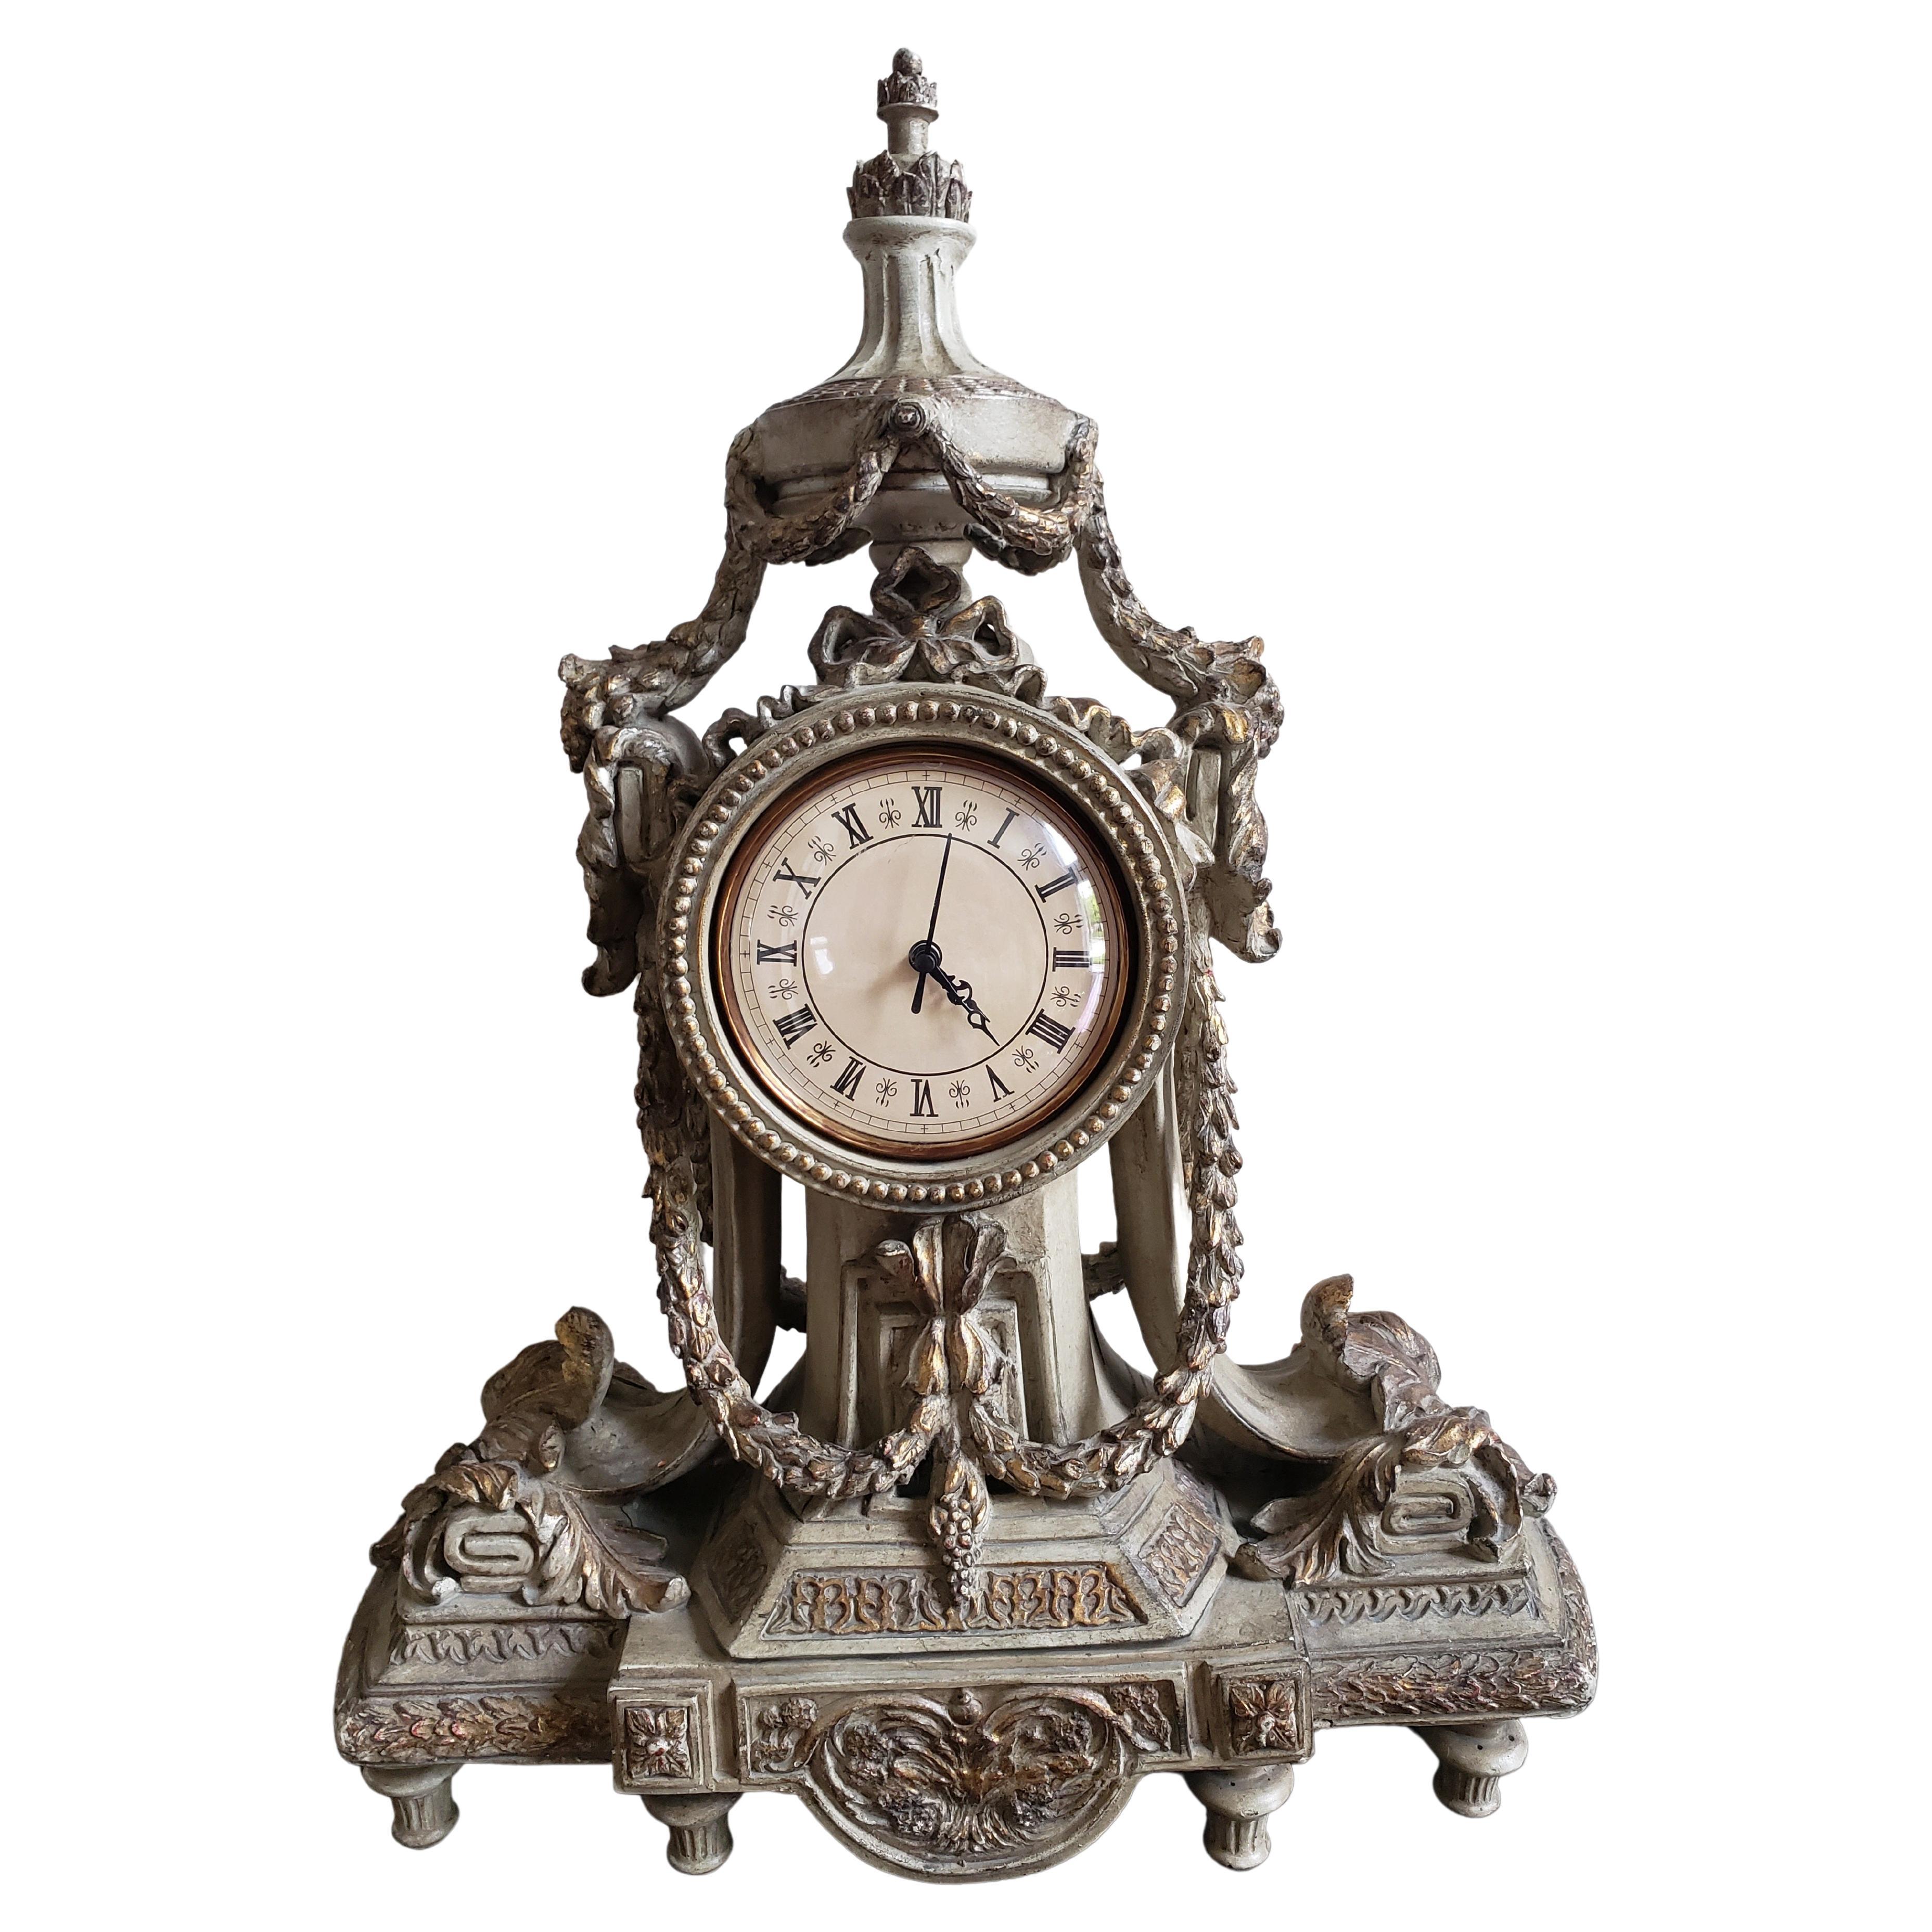 Louis XVI Style Partial Gilt and decorated Mantle Clock. True to the decorative arts of the 19 th century, this quality designer statement work blends style and function as it glows in the rich palette of the ancient world. 
Measures 17.5